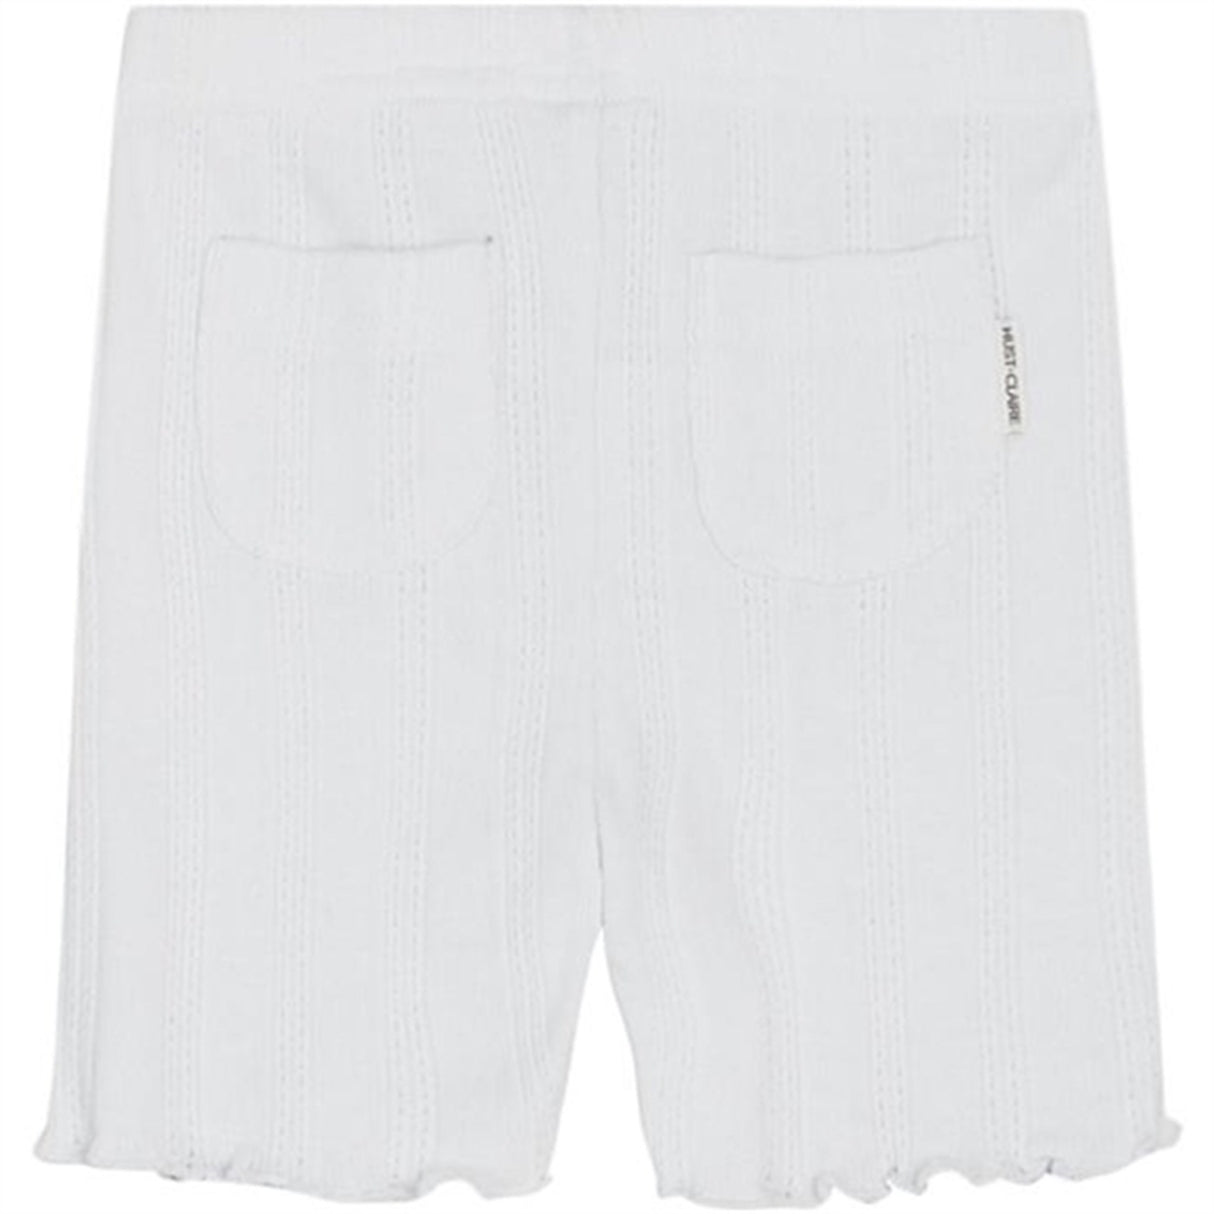 Hust & Claire Baby Lilina Shorts White 2